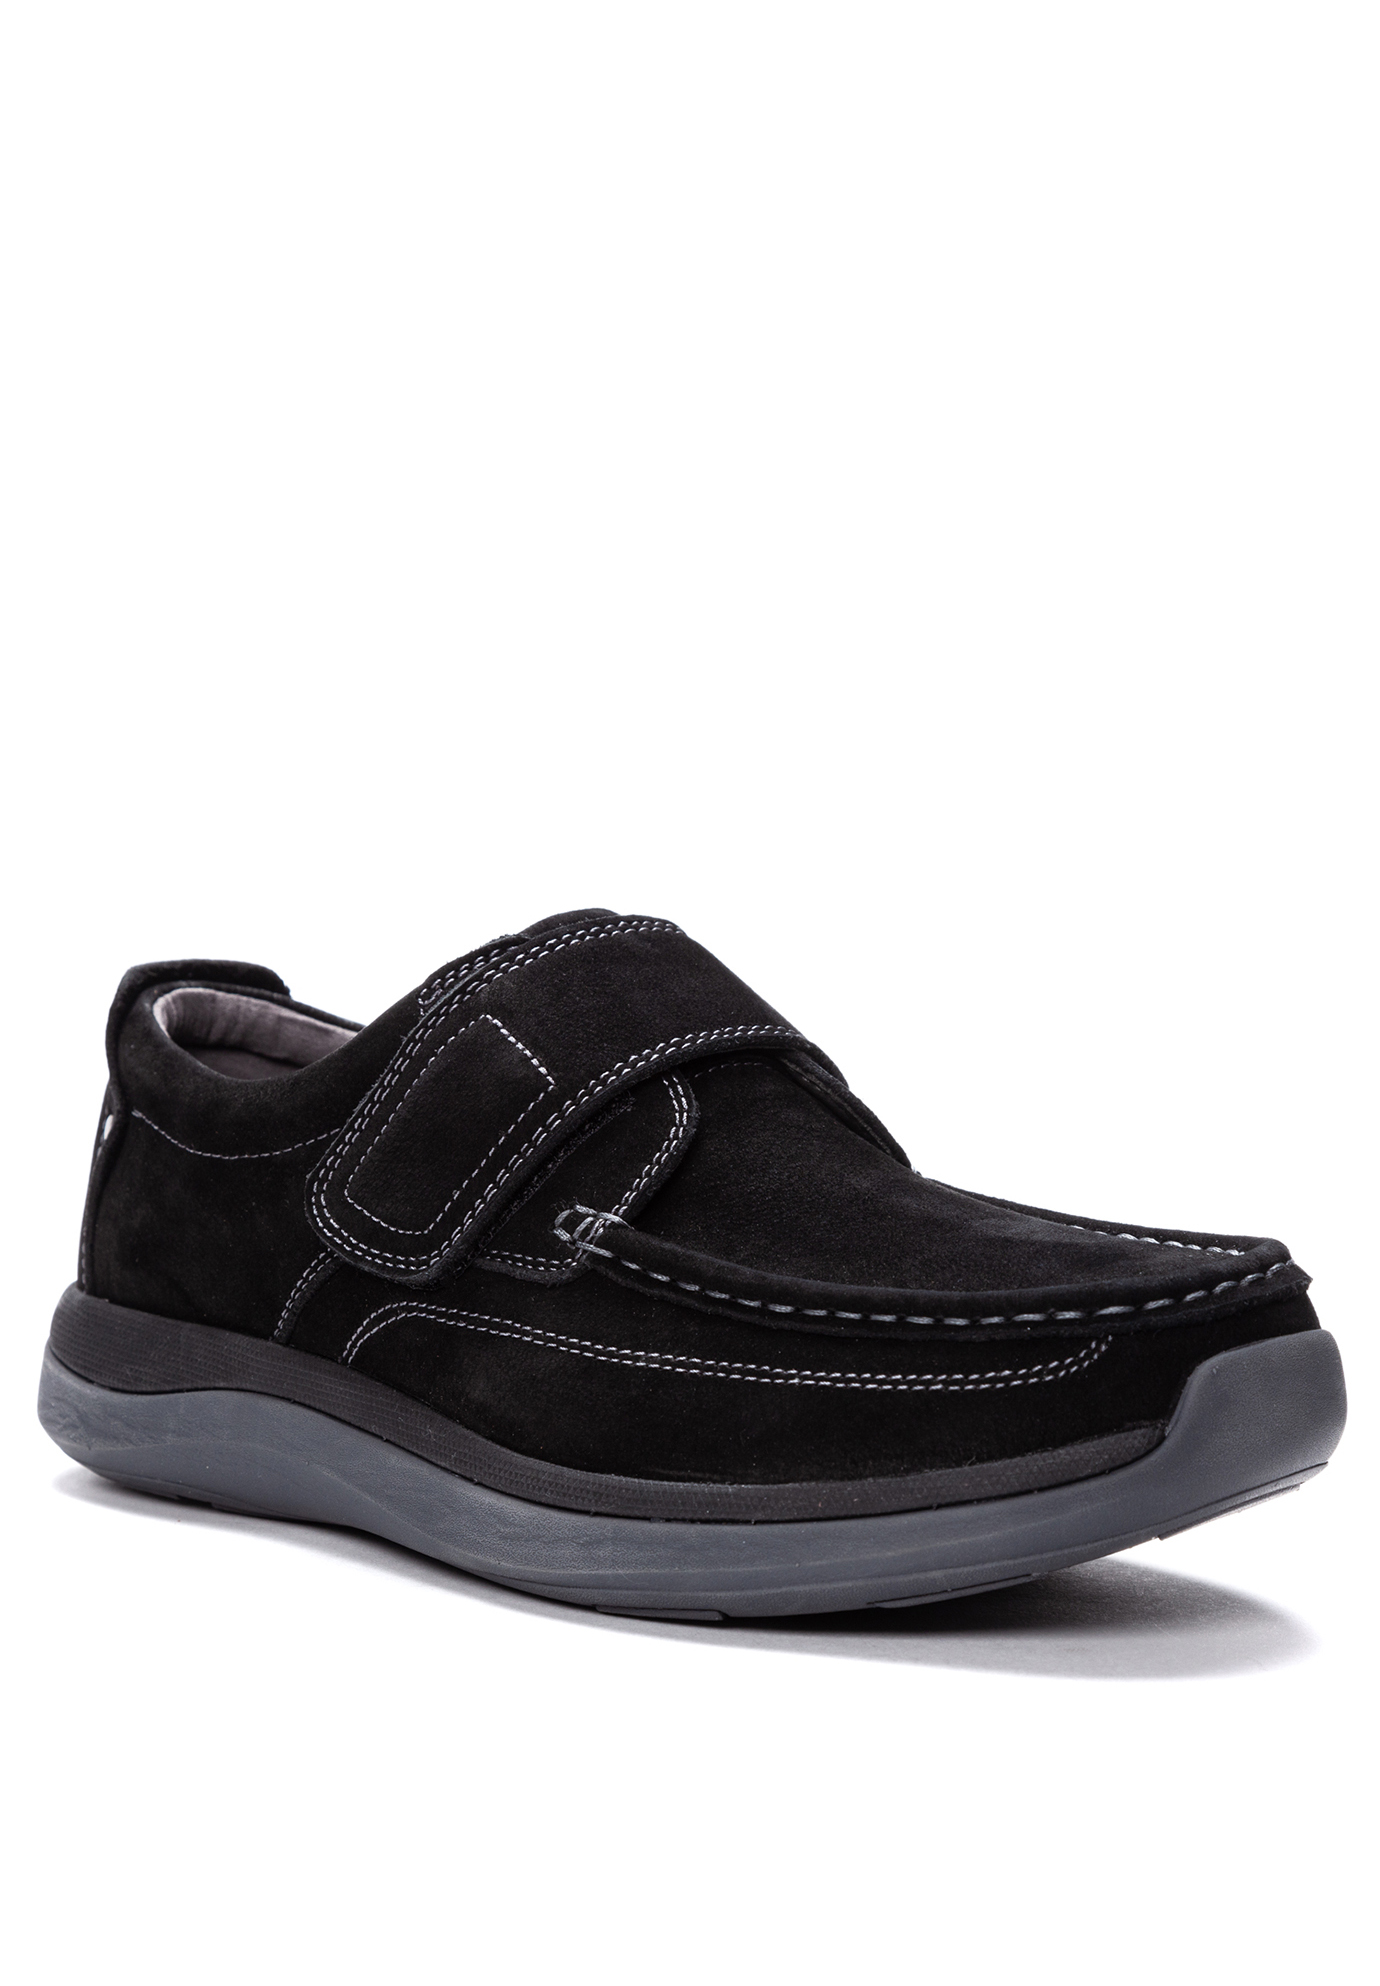 Men&apos;s Porter Loafer Casual Shoes, BLACK